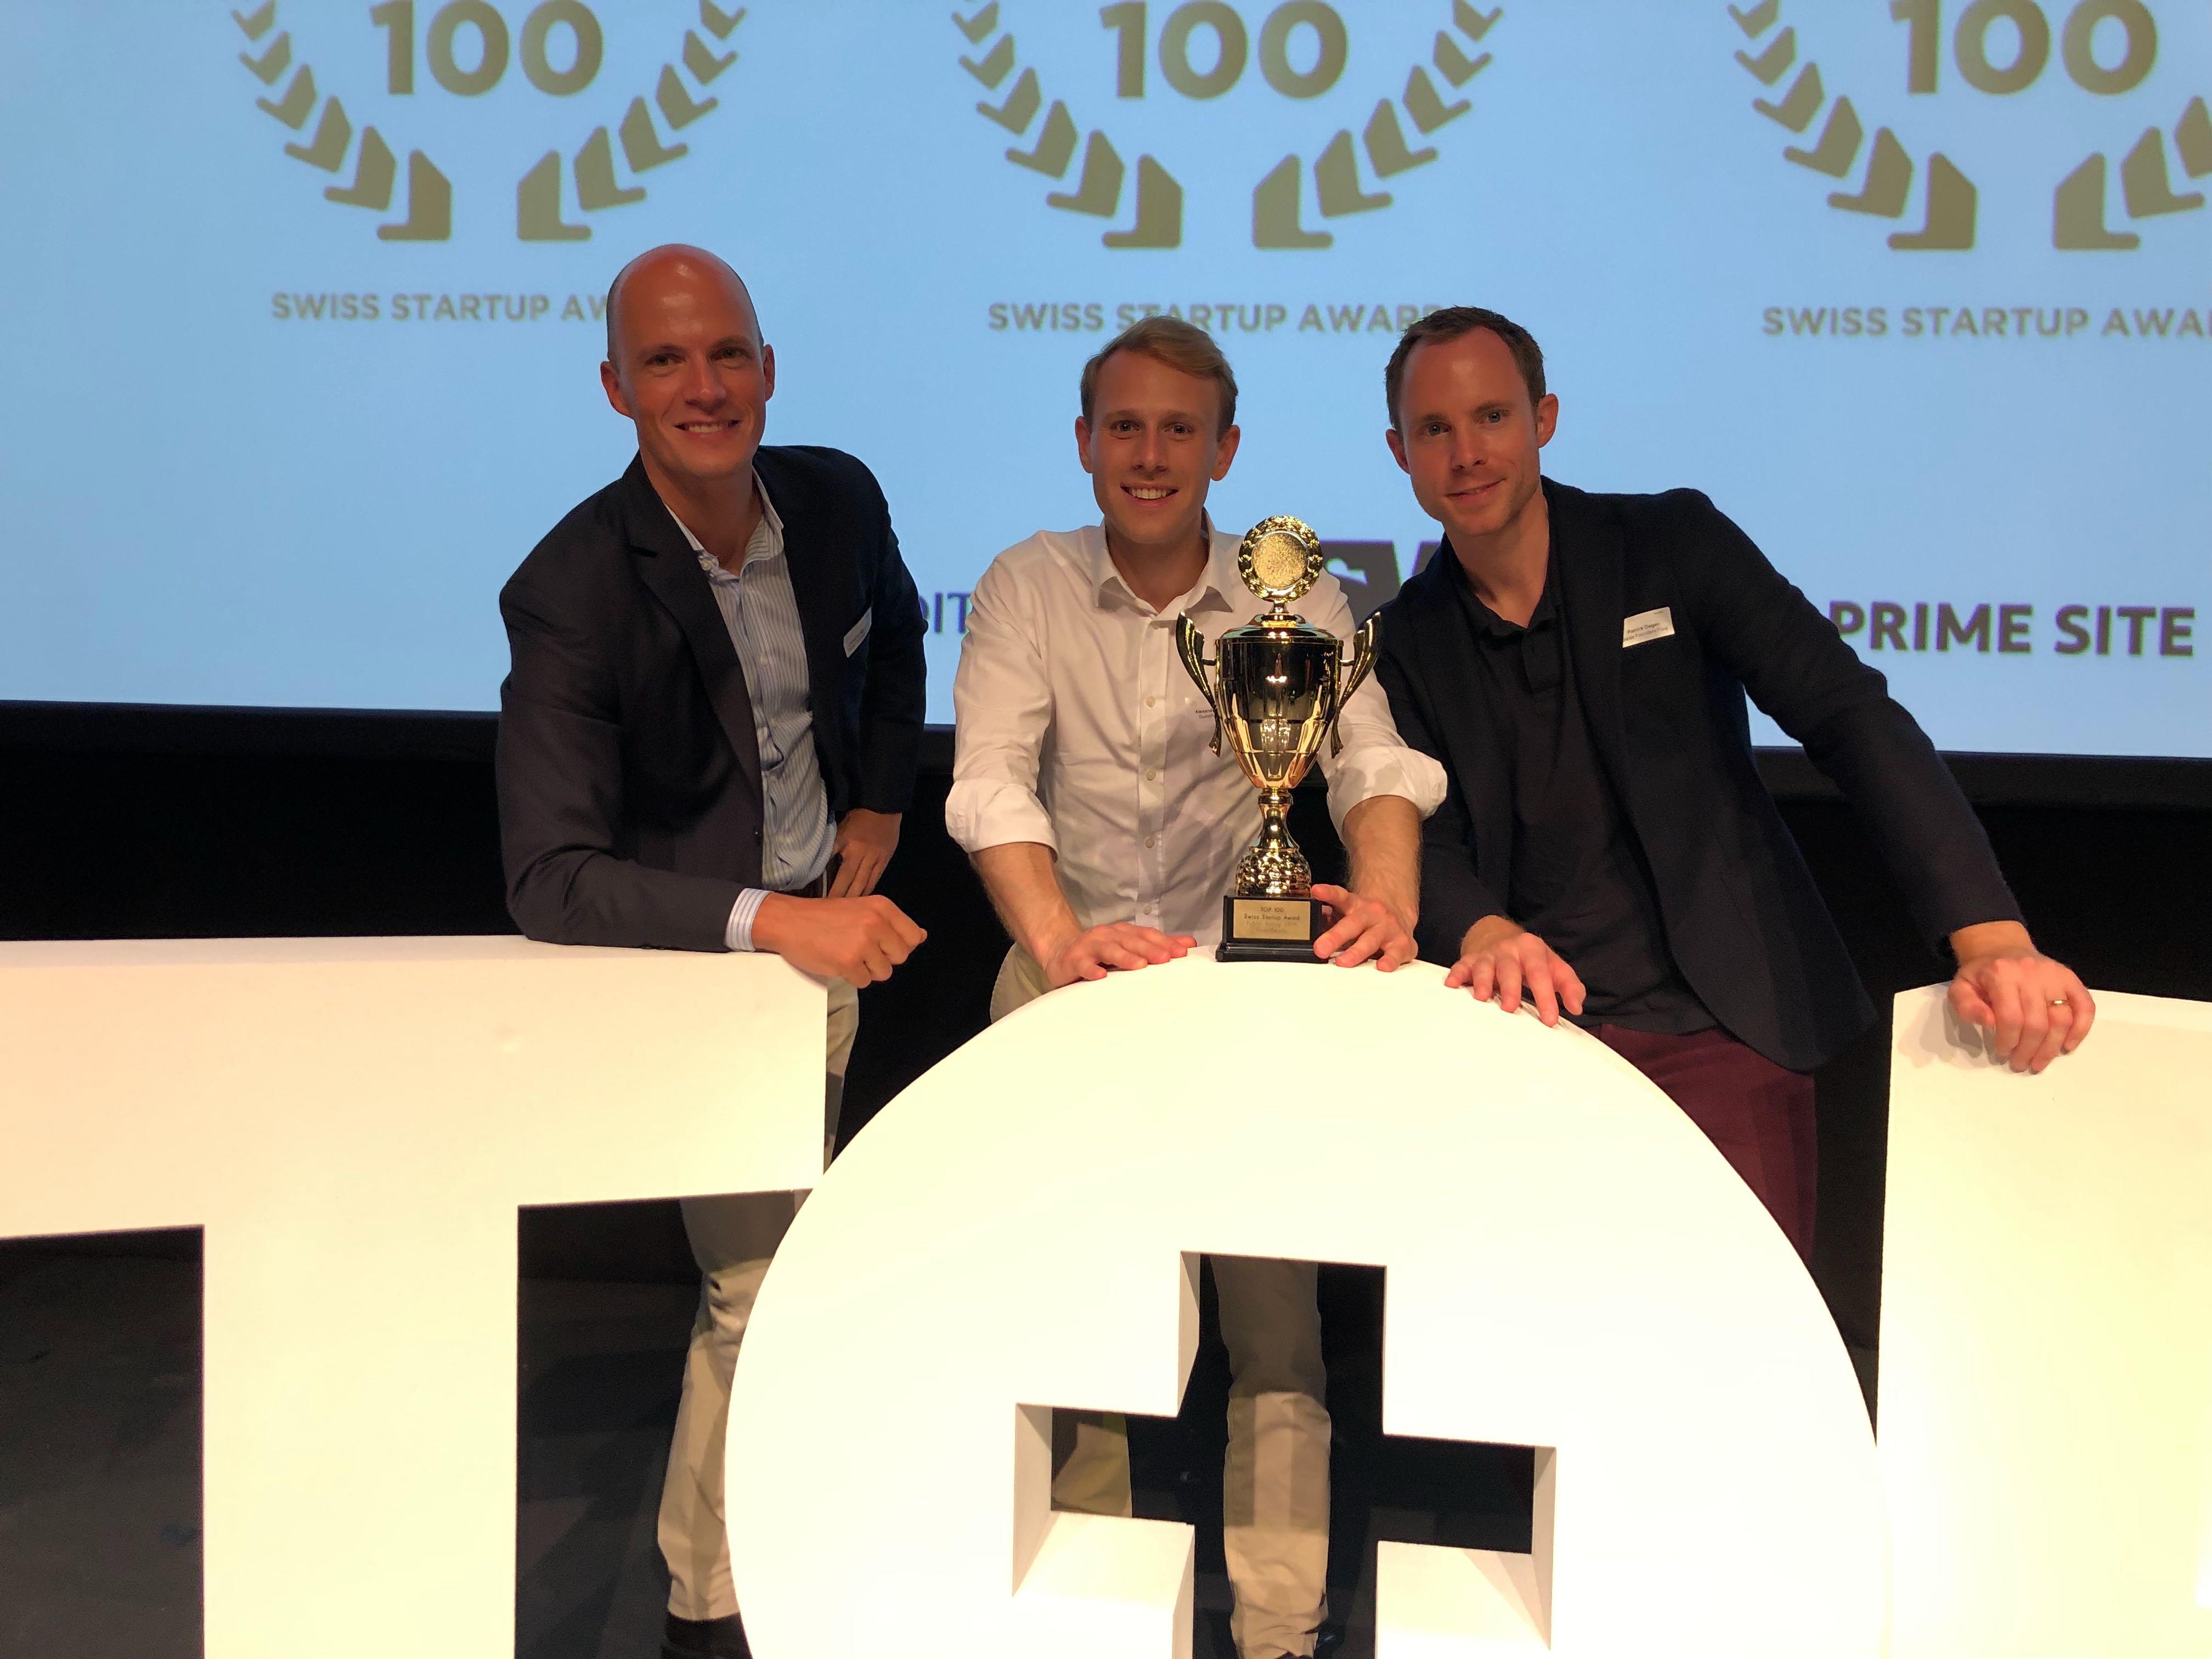 GuestReady wins Public Vote at the TOP 100 Startup Awards 